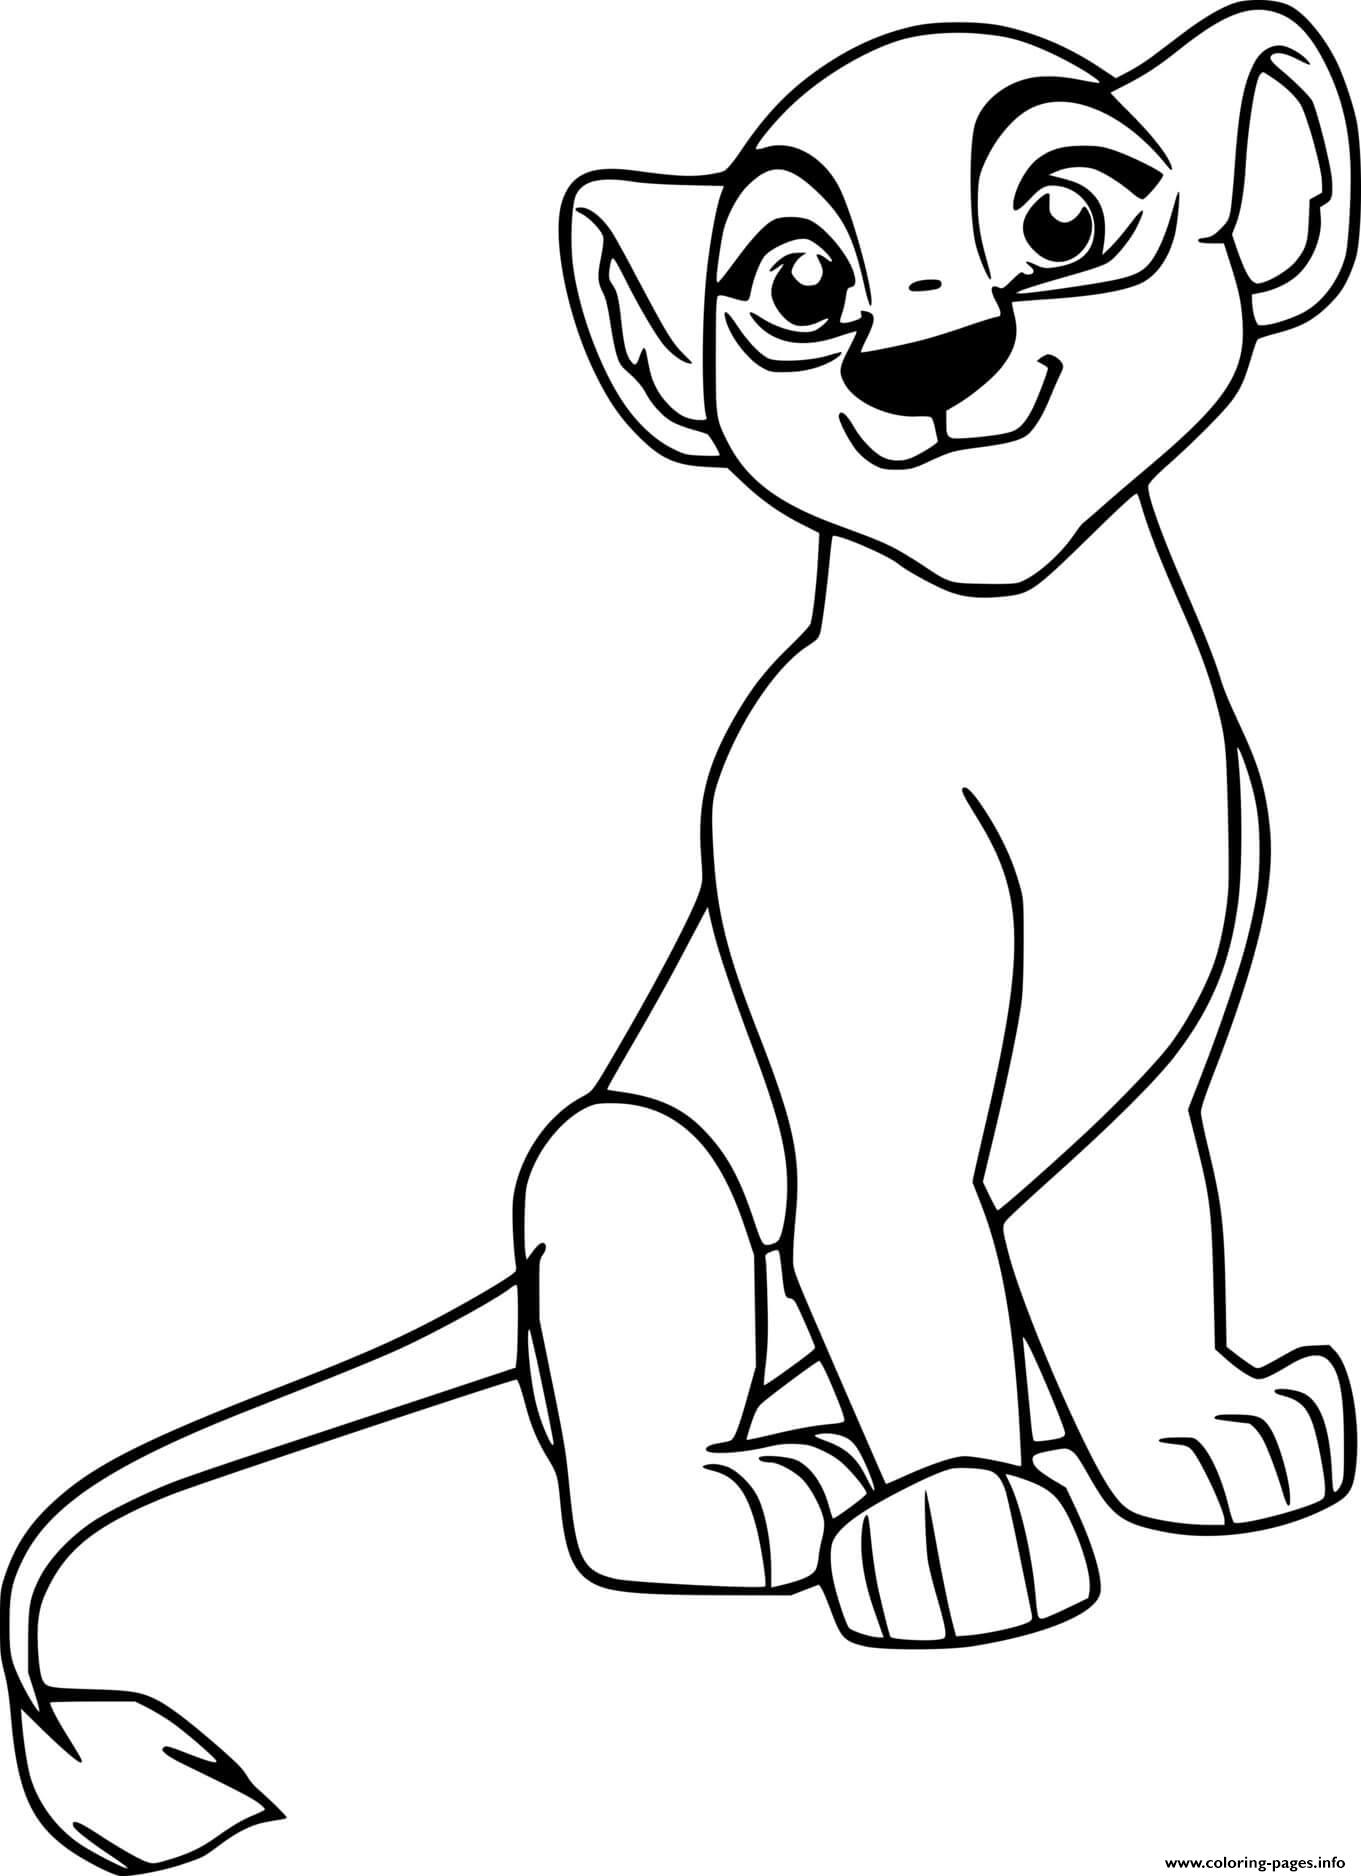 Kiara From Lion Guard Coloring Pages Printable